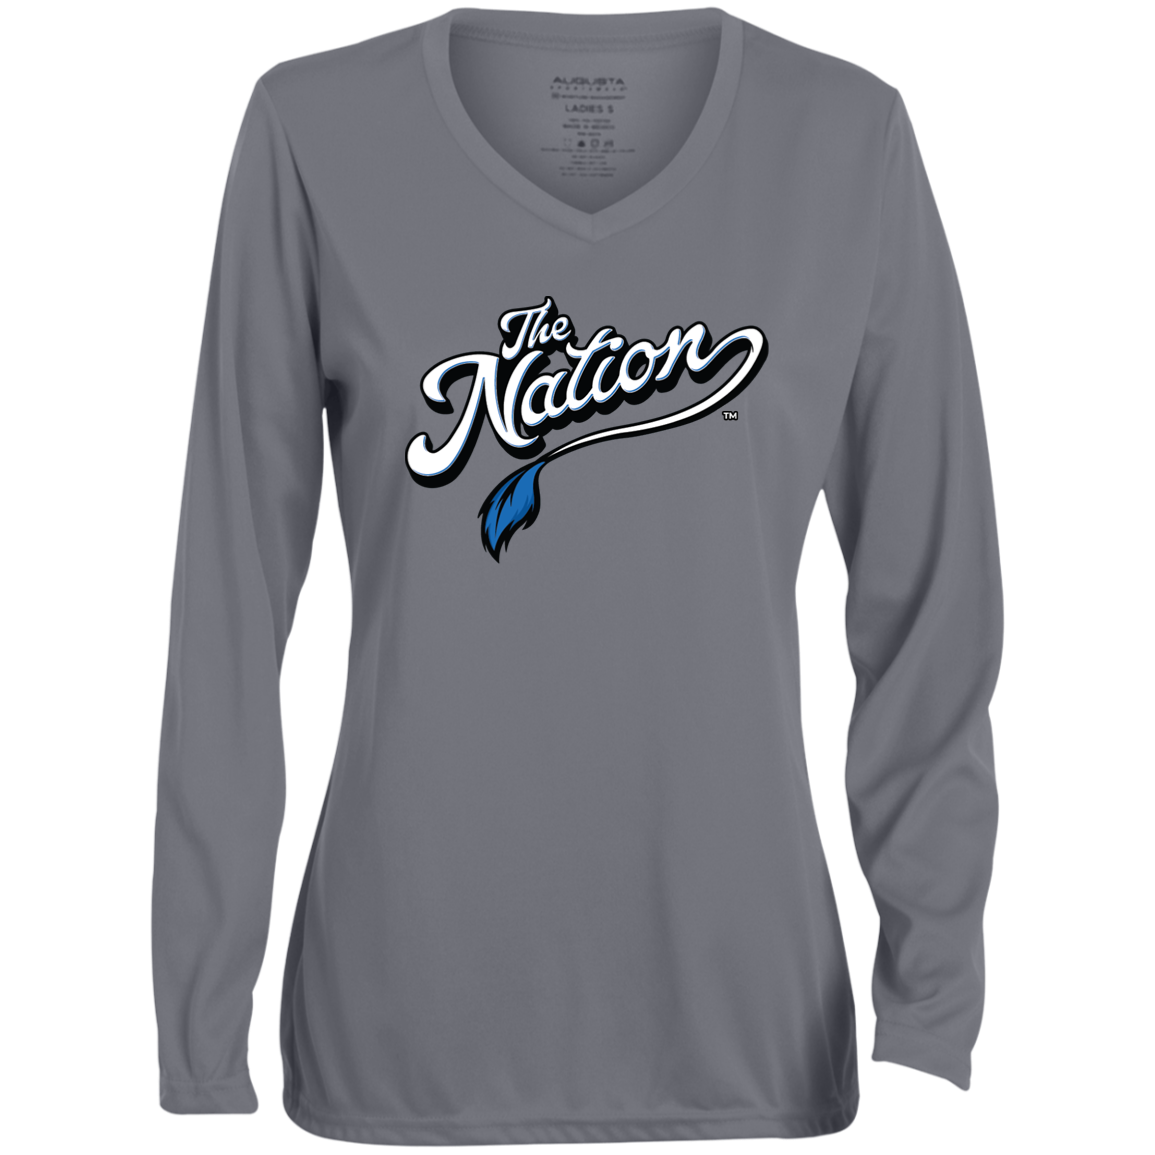 The Nation™ Ladies' Long Sleeve V-Neck Tee